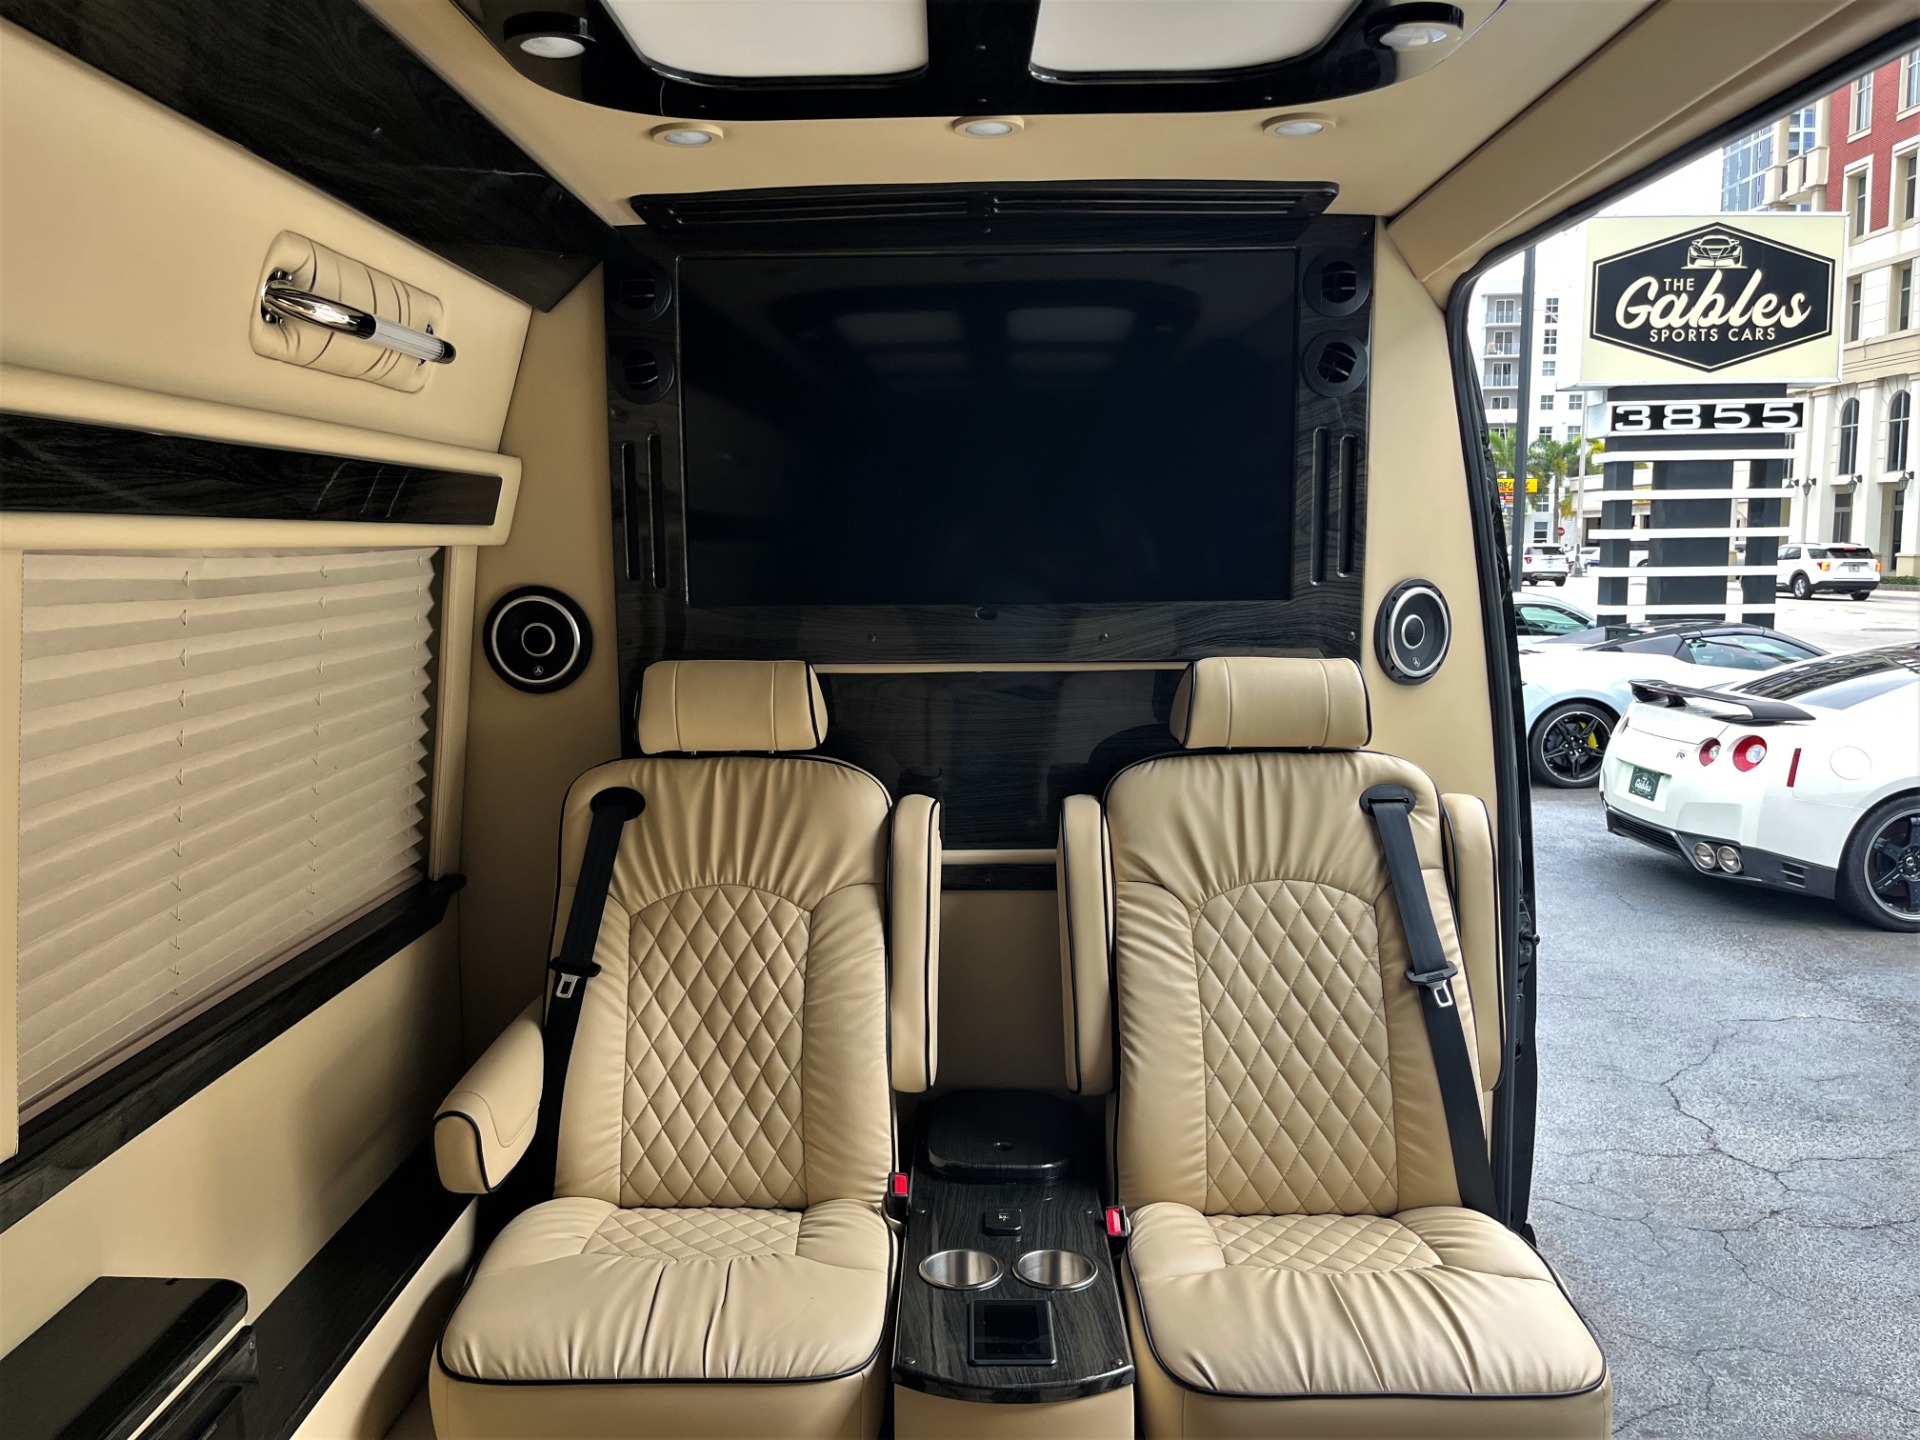 Used 2020 Mercedes-Benz Sprinter Cargo 3500 for sale Sold at The Gables Sports Cars in Miami FL 33146 3